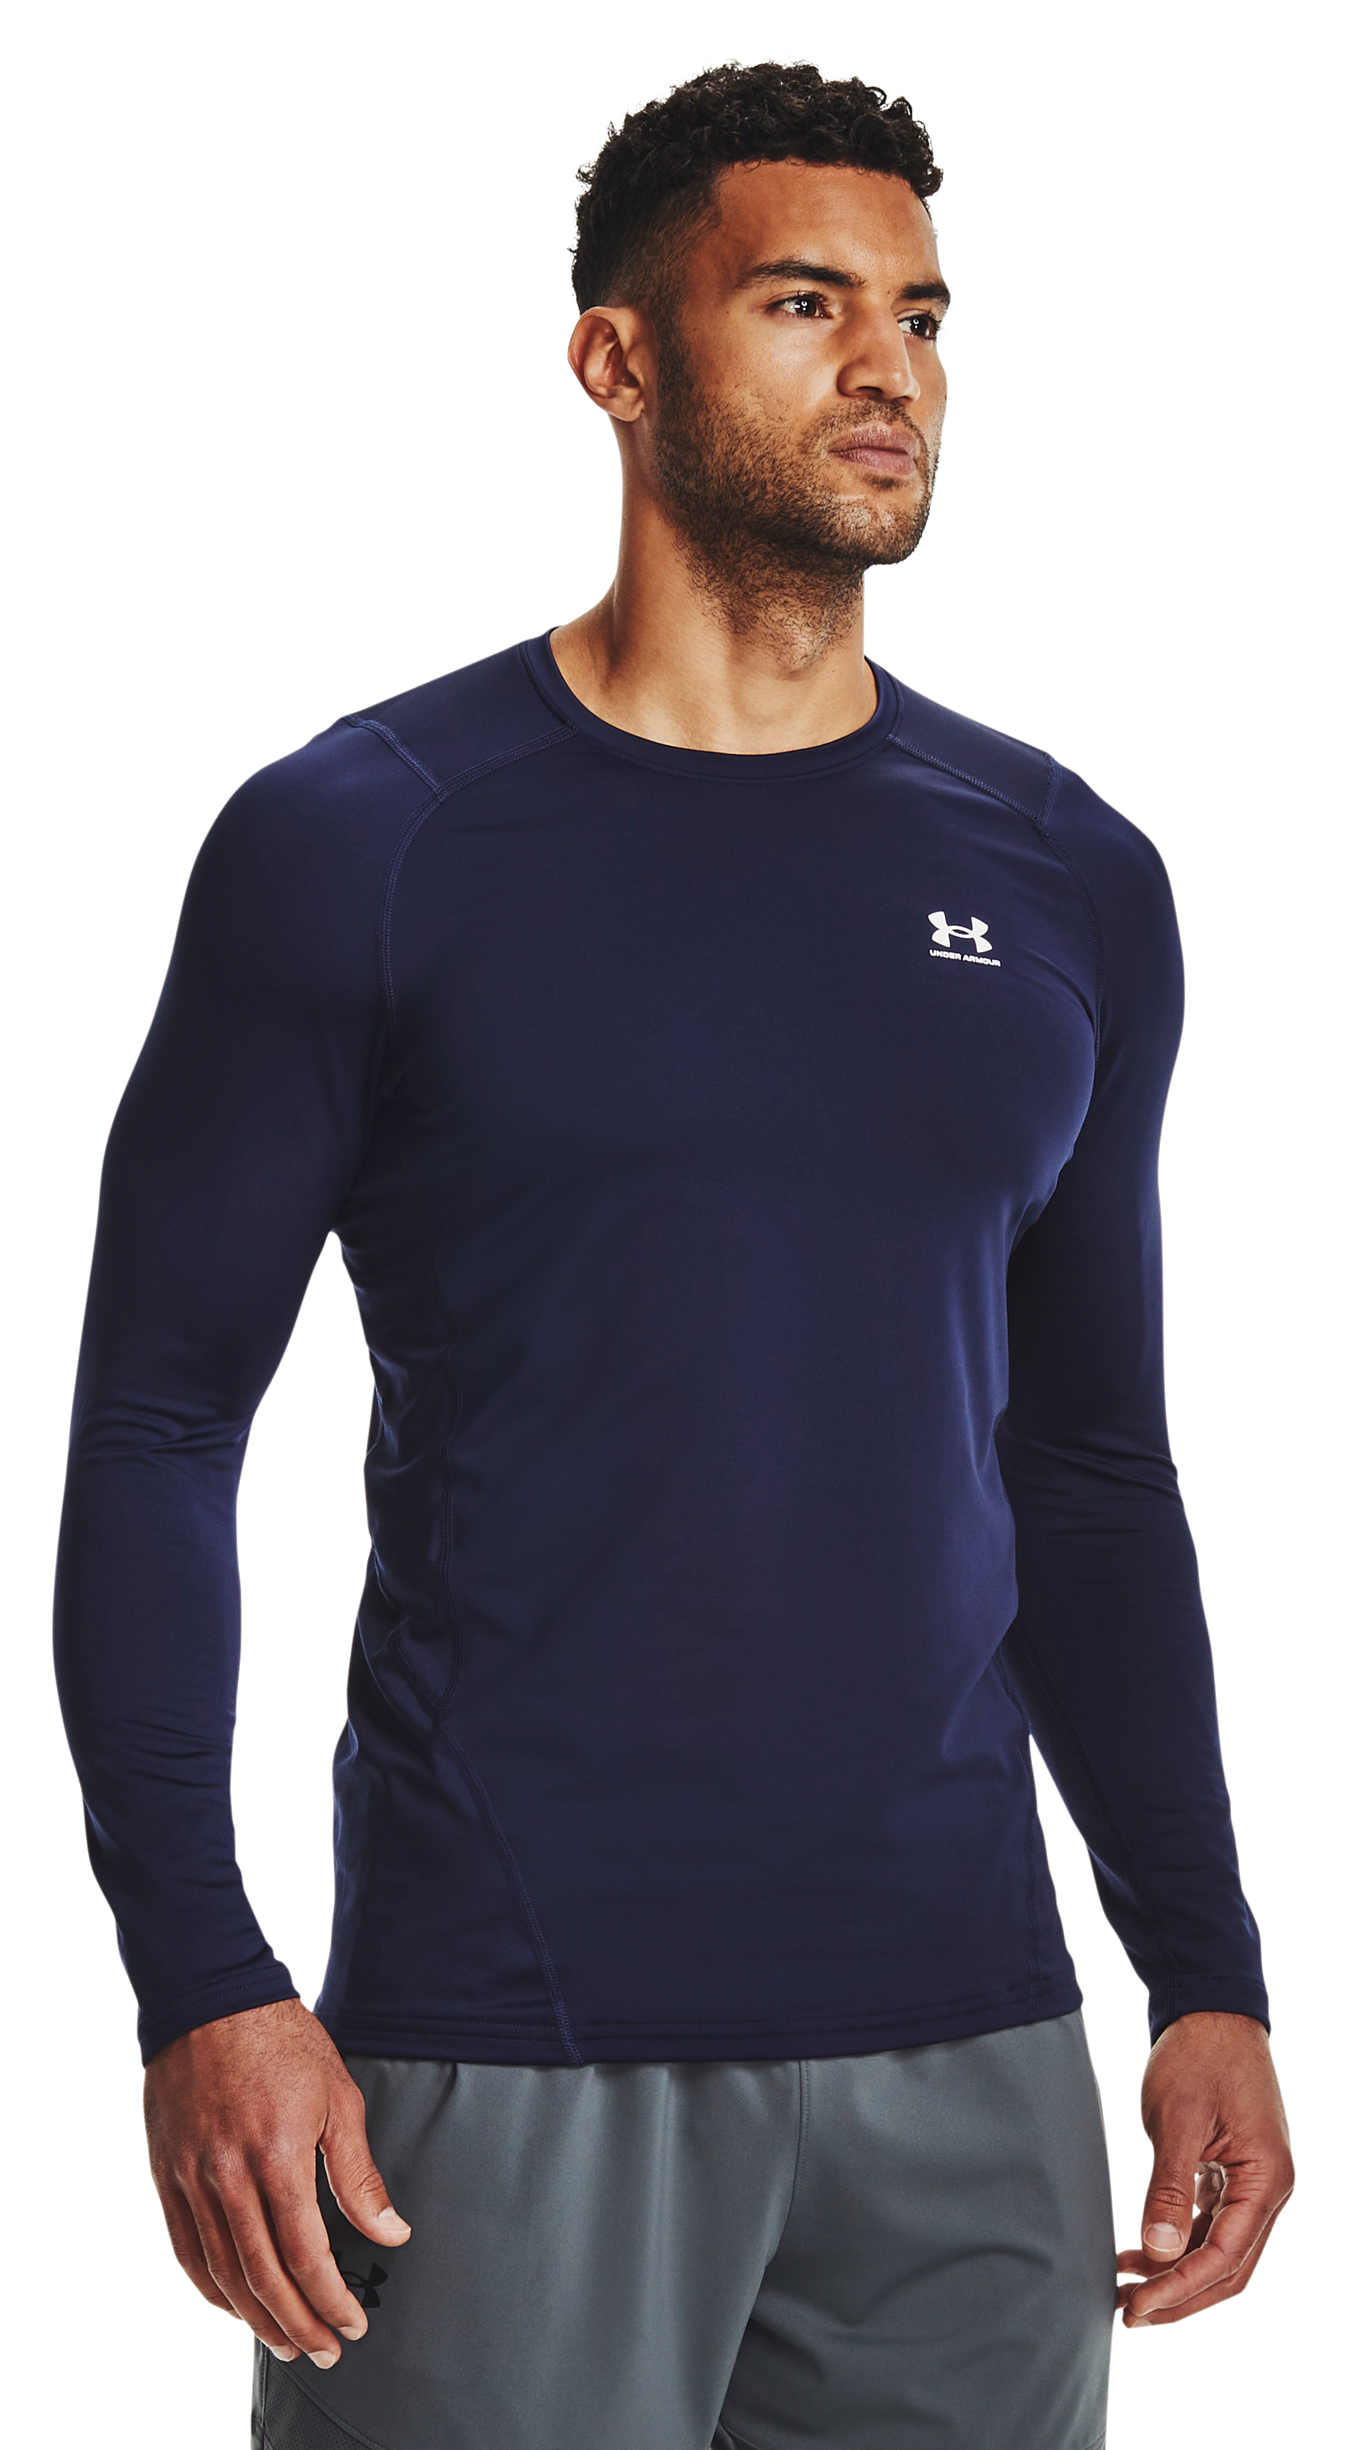 Under Armour ColdGear Fitted Long-Sleeve Crew for Men - Midnight Navy/White - 4XL